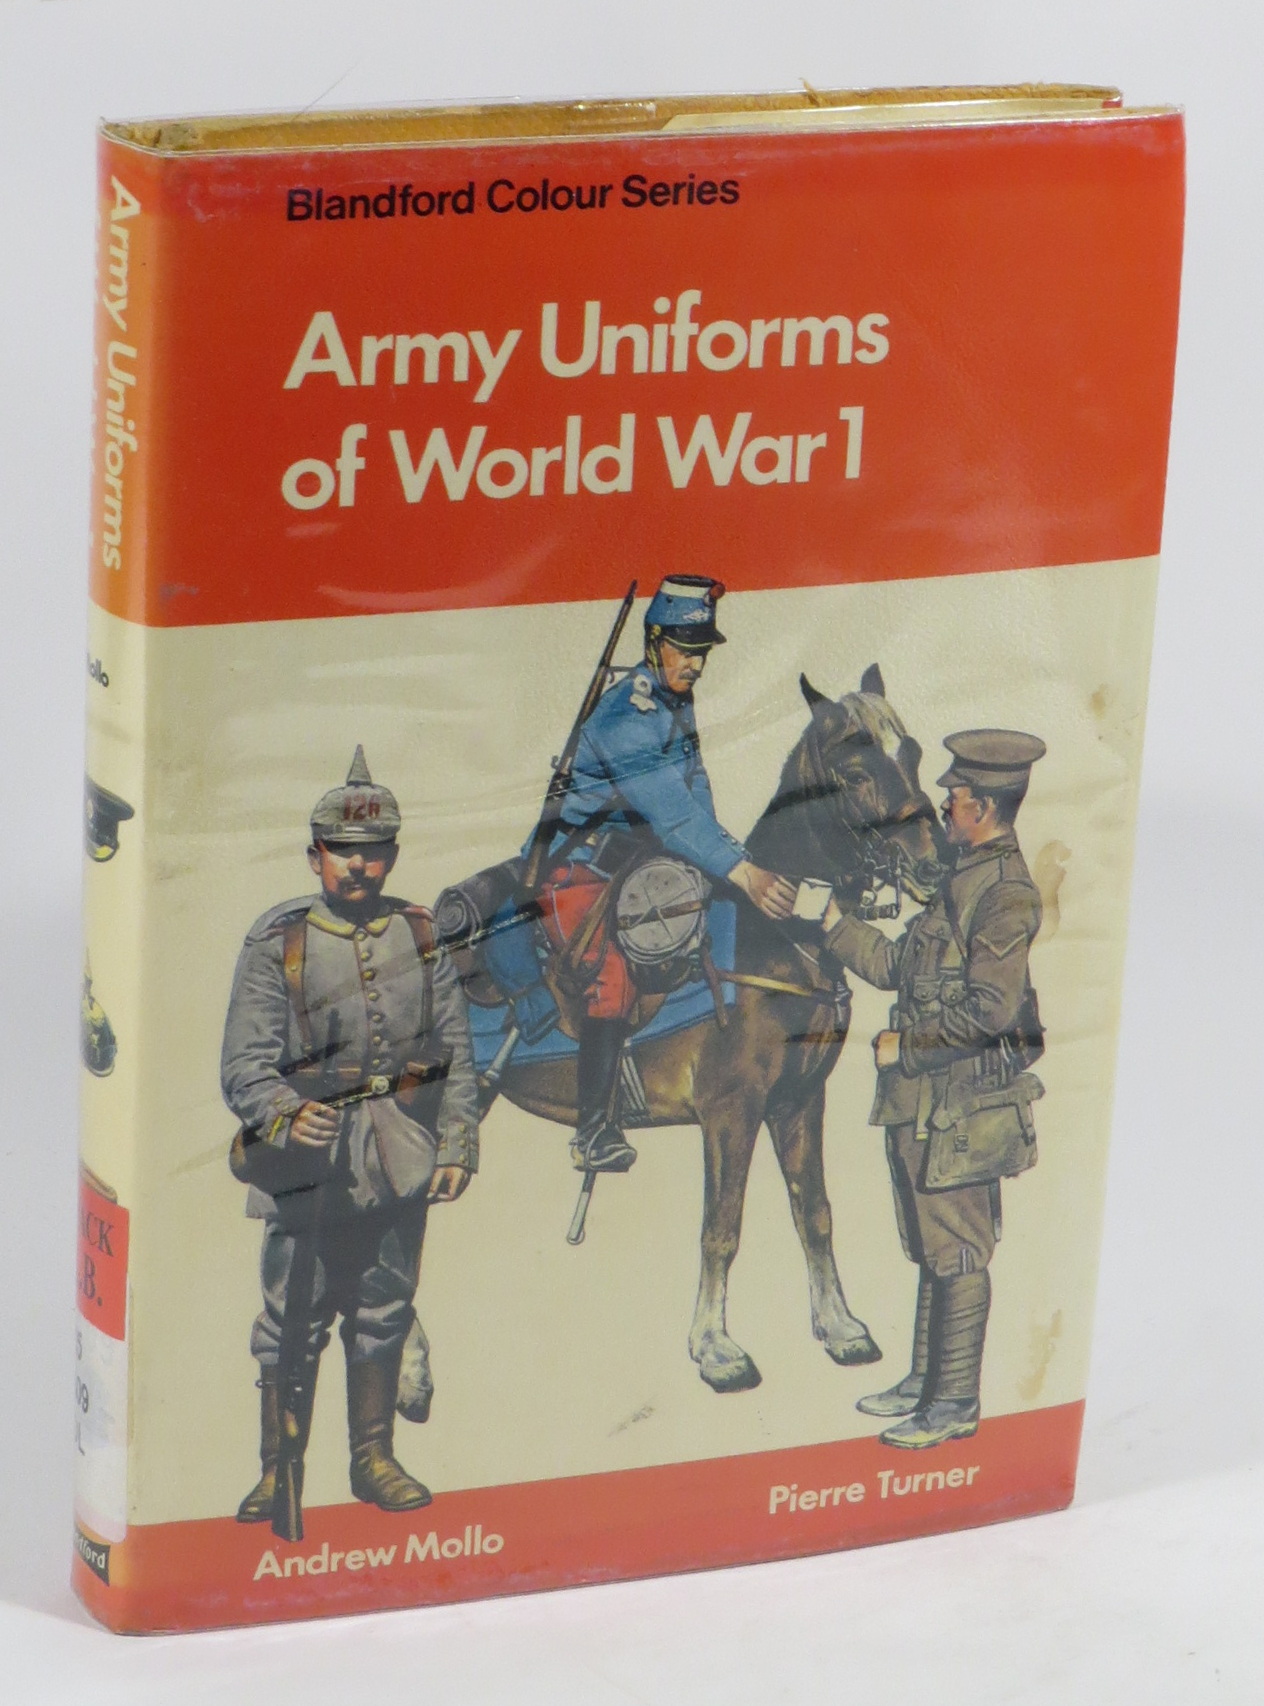 Army Uniforms of World War I : European and United States Armies and Aviation Services - Mollo, Andrew; Pierre Turner (illustrated by)